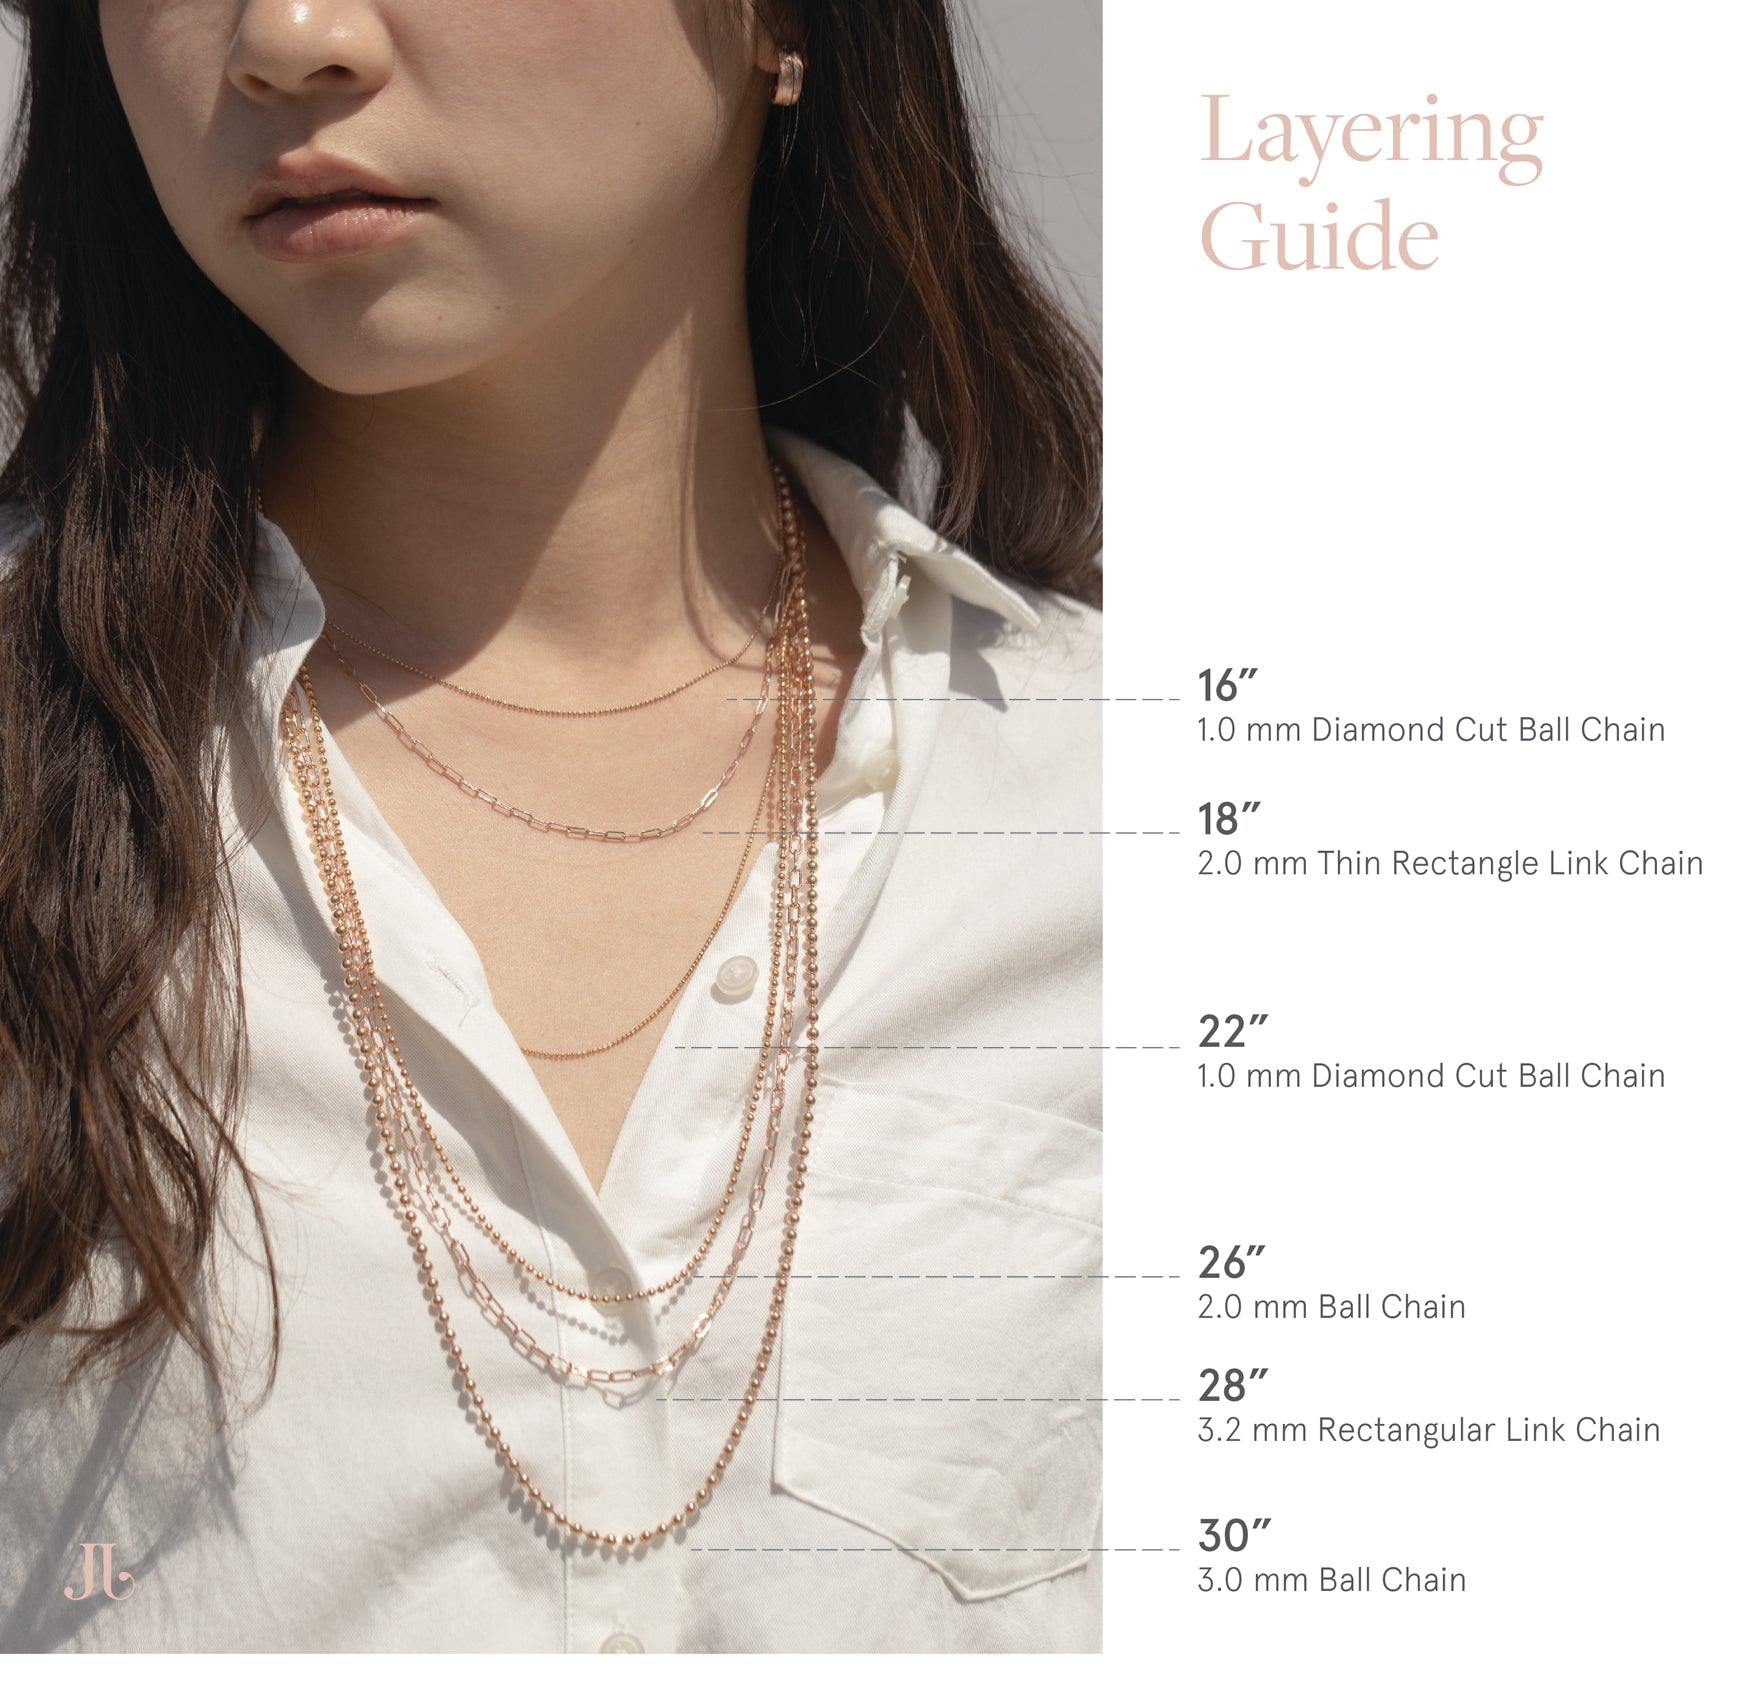 Layered Necklace Guide